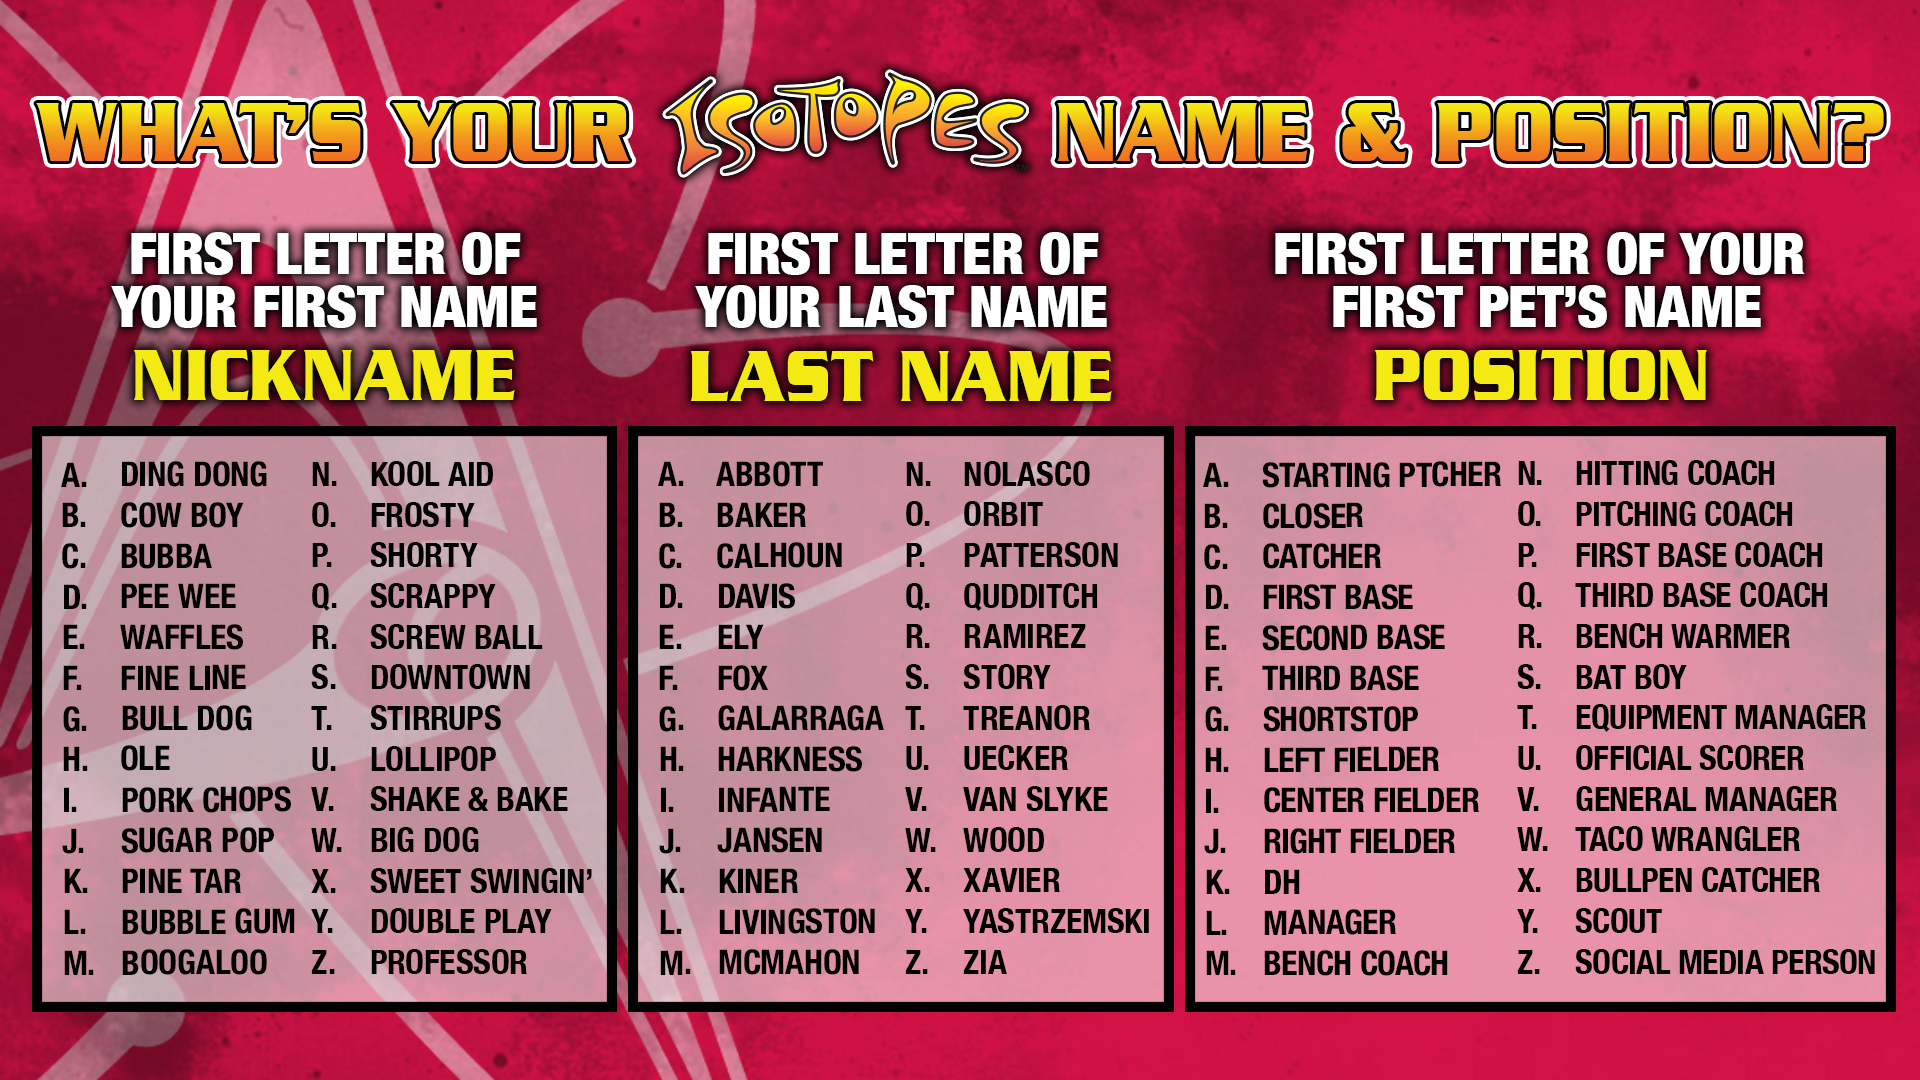 Albuquerque Isotopes No You Still Can T Try Out For The Isotopes But If You Were A Member Of Team What Would Your Name And Position Be T Co Nuqpxtcsj2